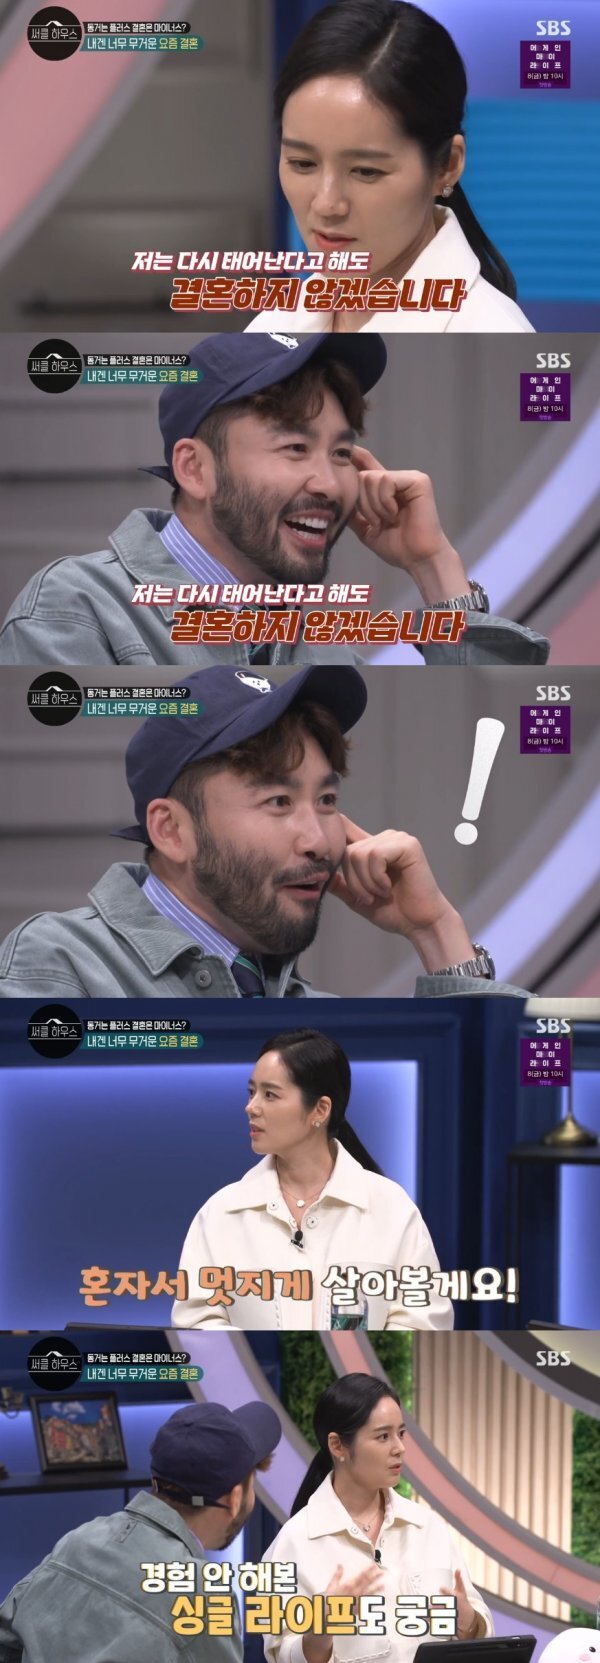 In the SBS entertainment program Circle House, which was broadcast on the afternoon of the 31st, the story was told under the theme of Coming Plus Marriage is minus?On this day, Noh Hong-chul asked Dr. Oh Eun Young and actor Han Ga-in, who are married women, Do not you have to marry?Dr. Oh Eun Young said, I tell you to marry if you have a favorite person.But Han Ga-ins answer was different: Im not going to get married even if Im born again, Han Ga-in said, Ill just live nicely by myself.When Noh Hong-chul asked, Have you experienced and done all your pretty children? Han Ga-in said, I have experienced it, so do not you wonder what it is like to live alone?